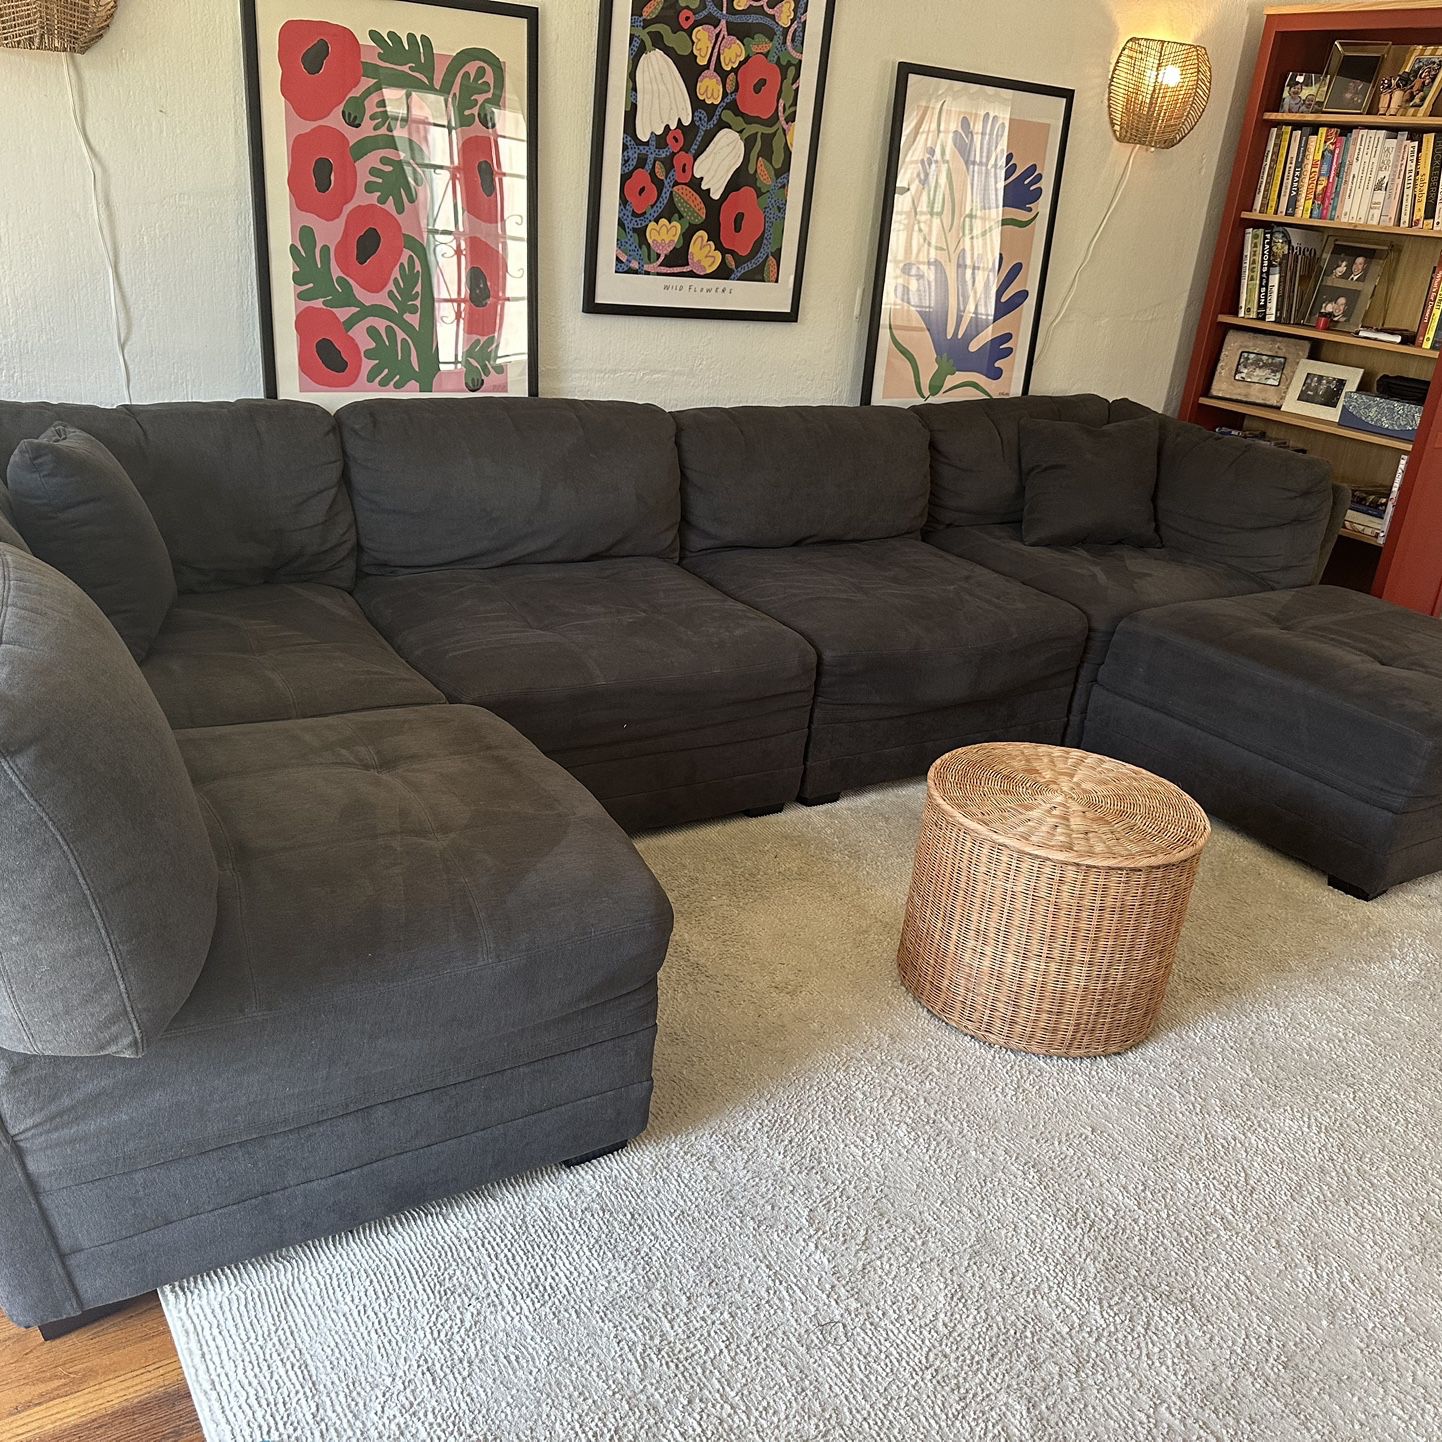 Large Grey Modular Sectional Couch With Storage